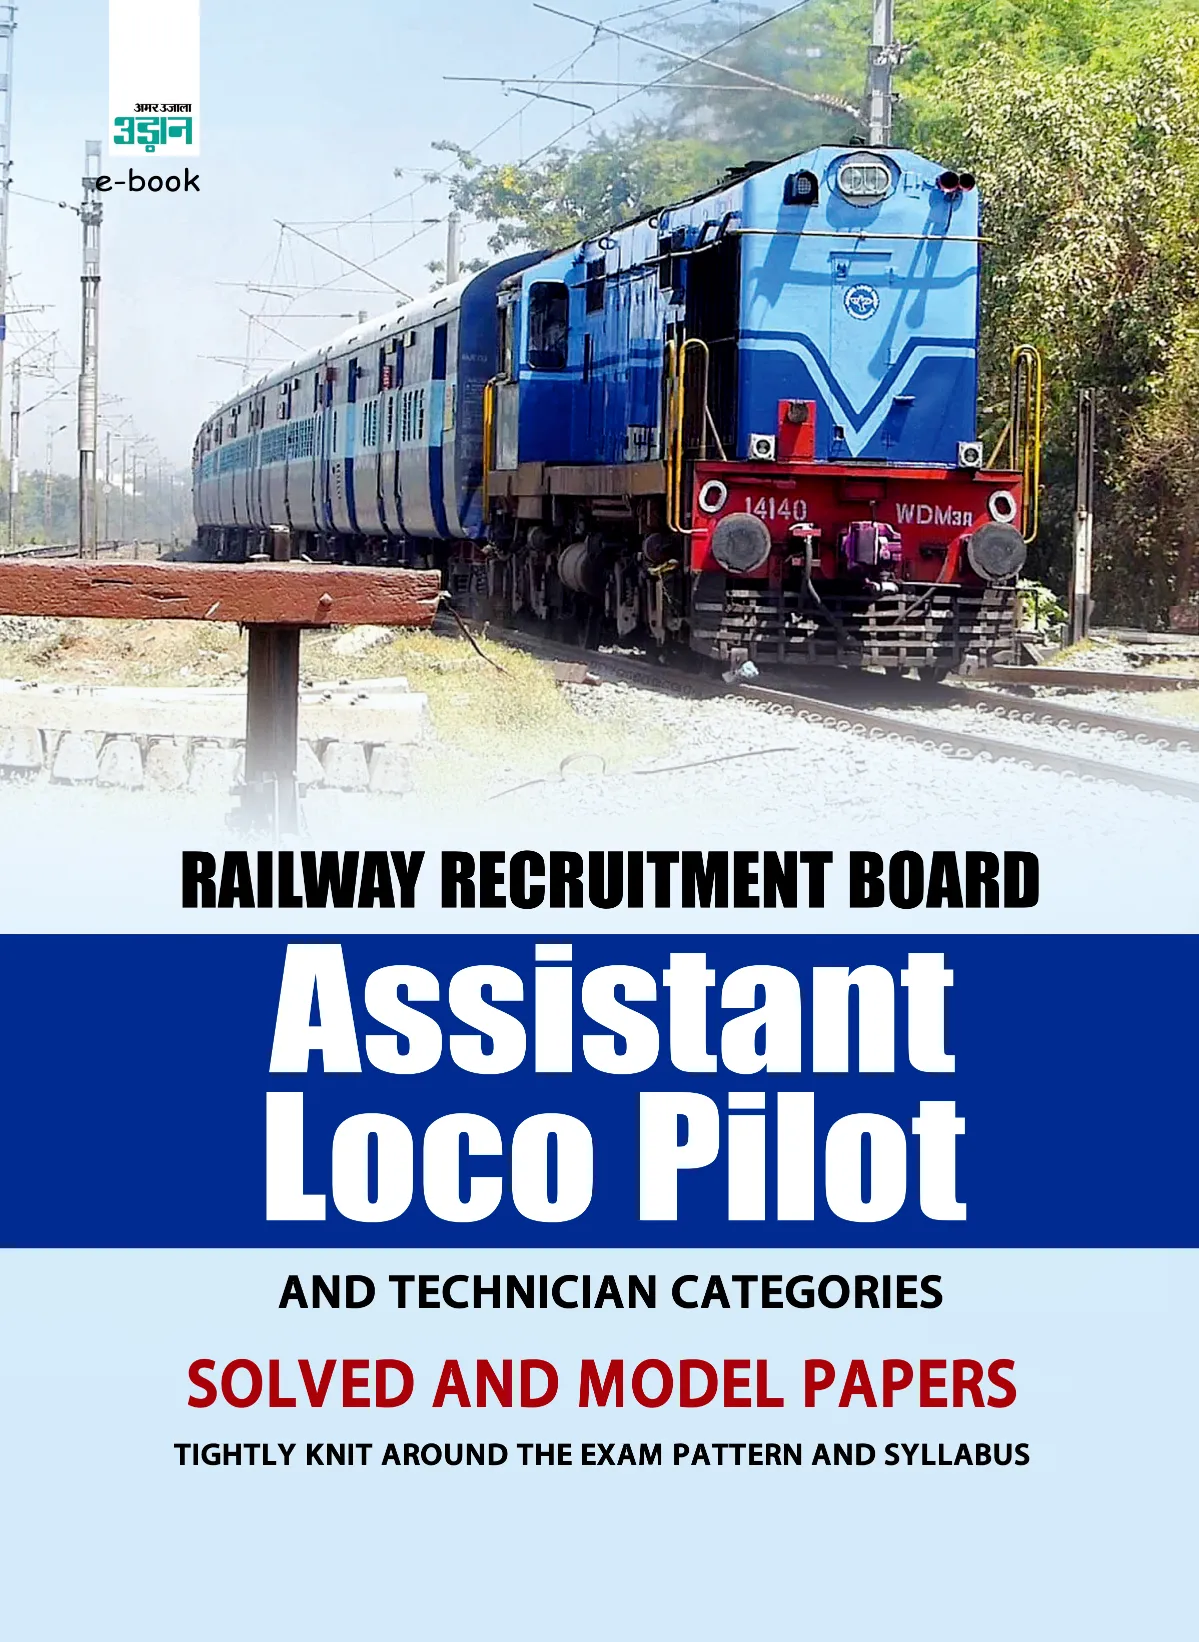 RRB Assistant Loco Pilot (Solved and Model Paper)